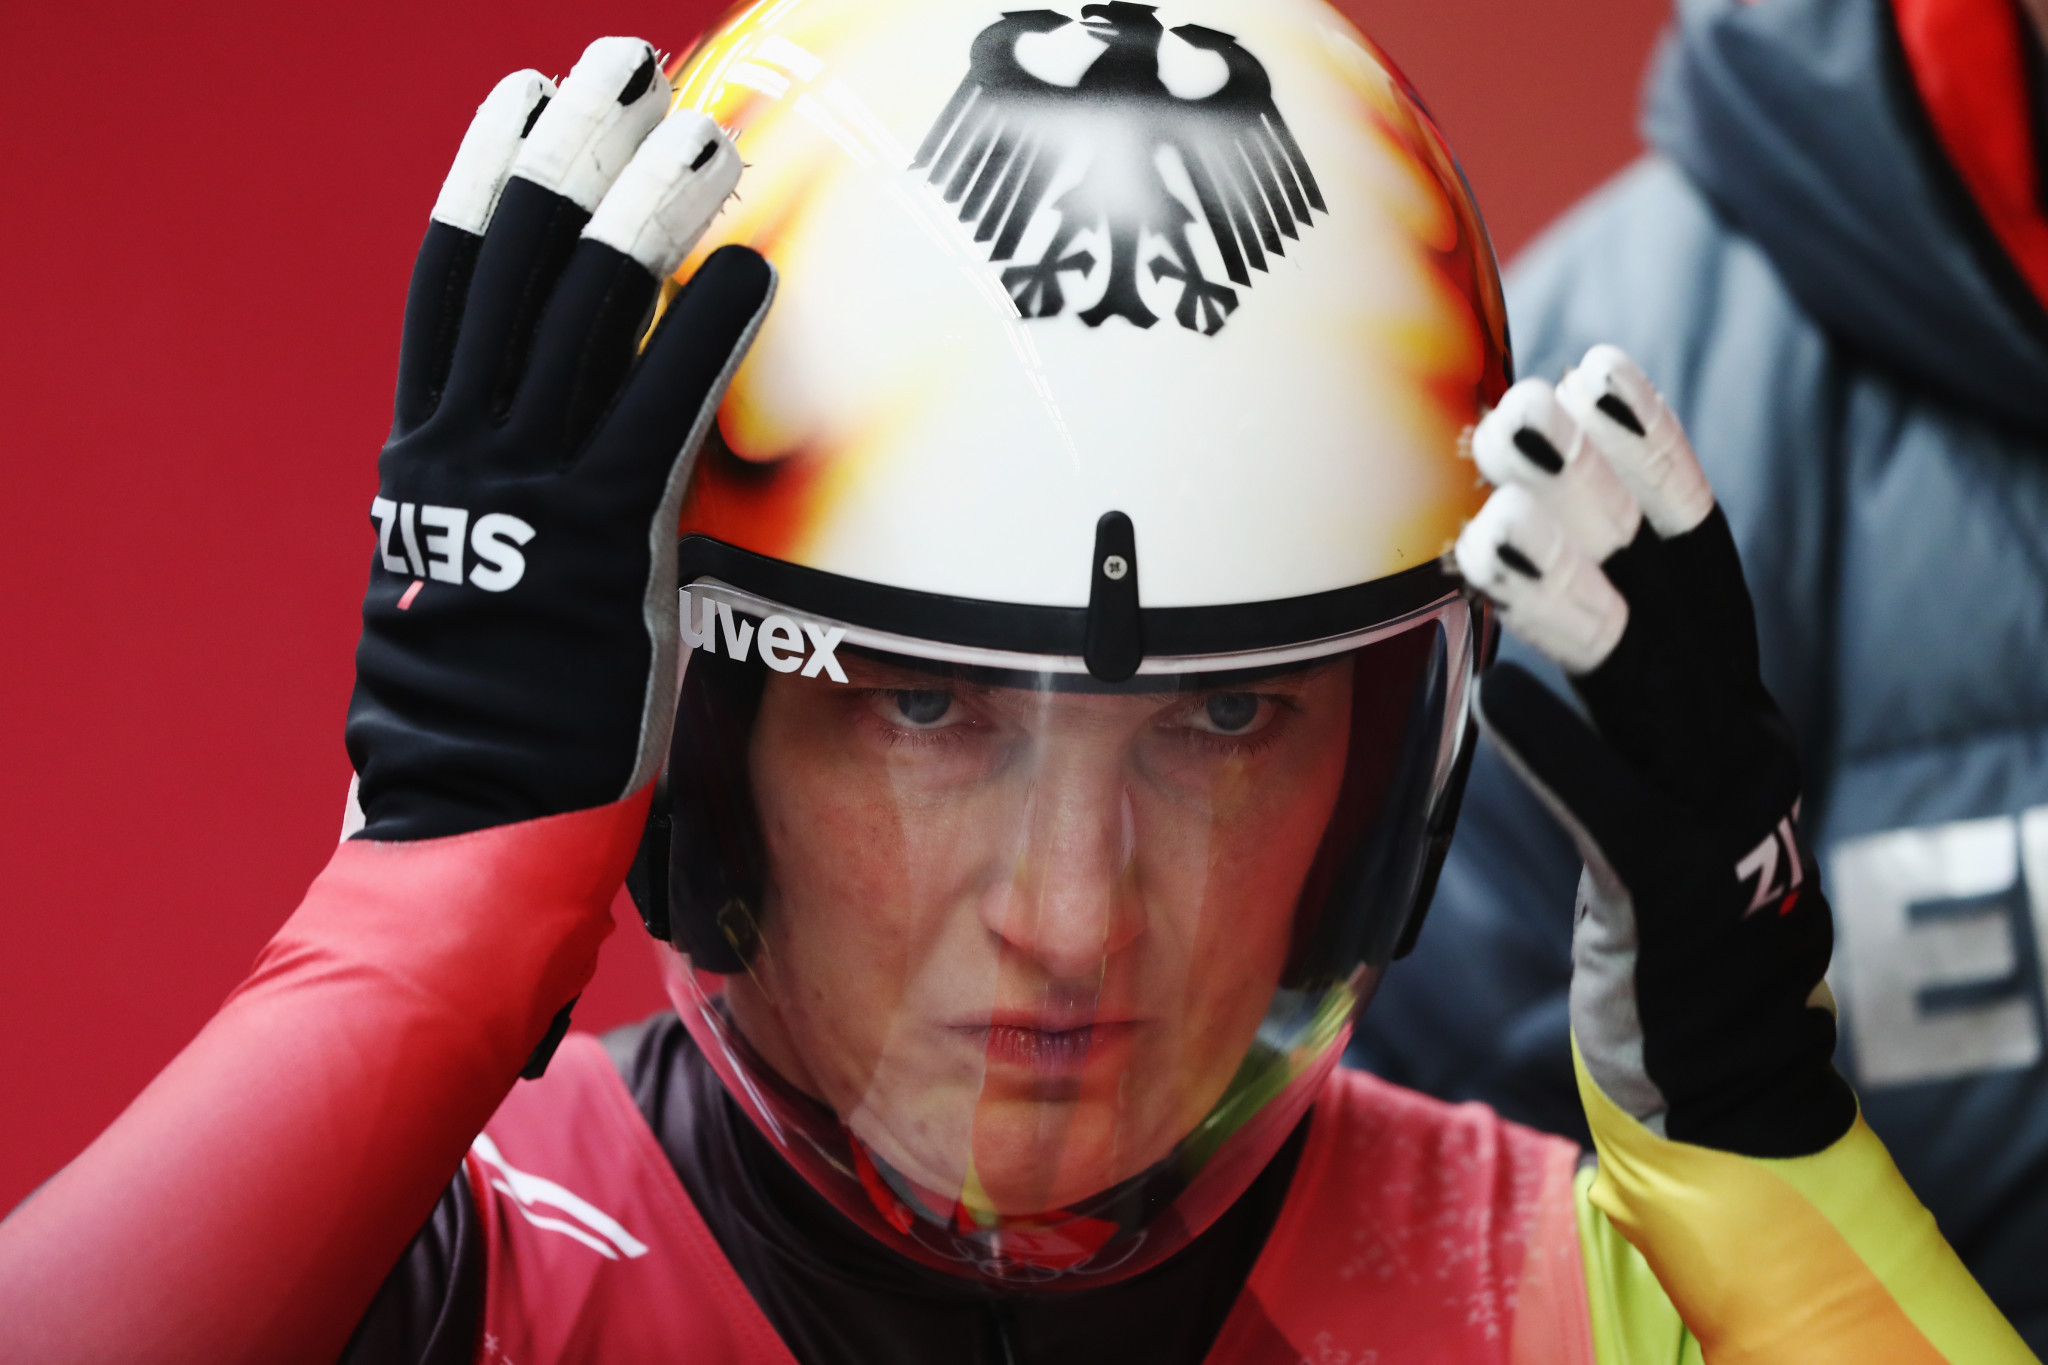 Olympic luge gold medallist Tatjana Hüfner has taken a coaching role in Italy ©Getty Images